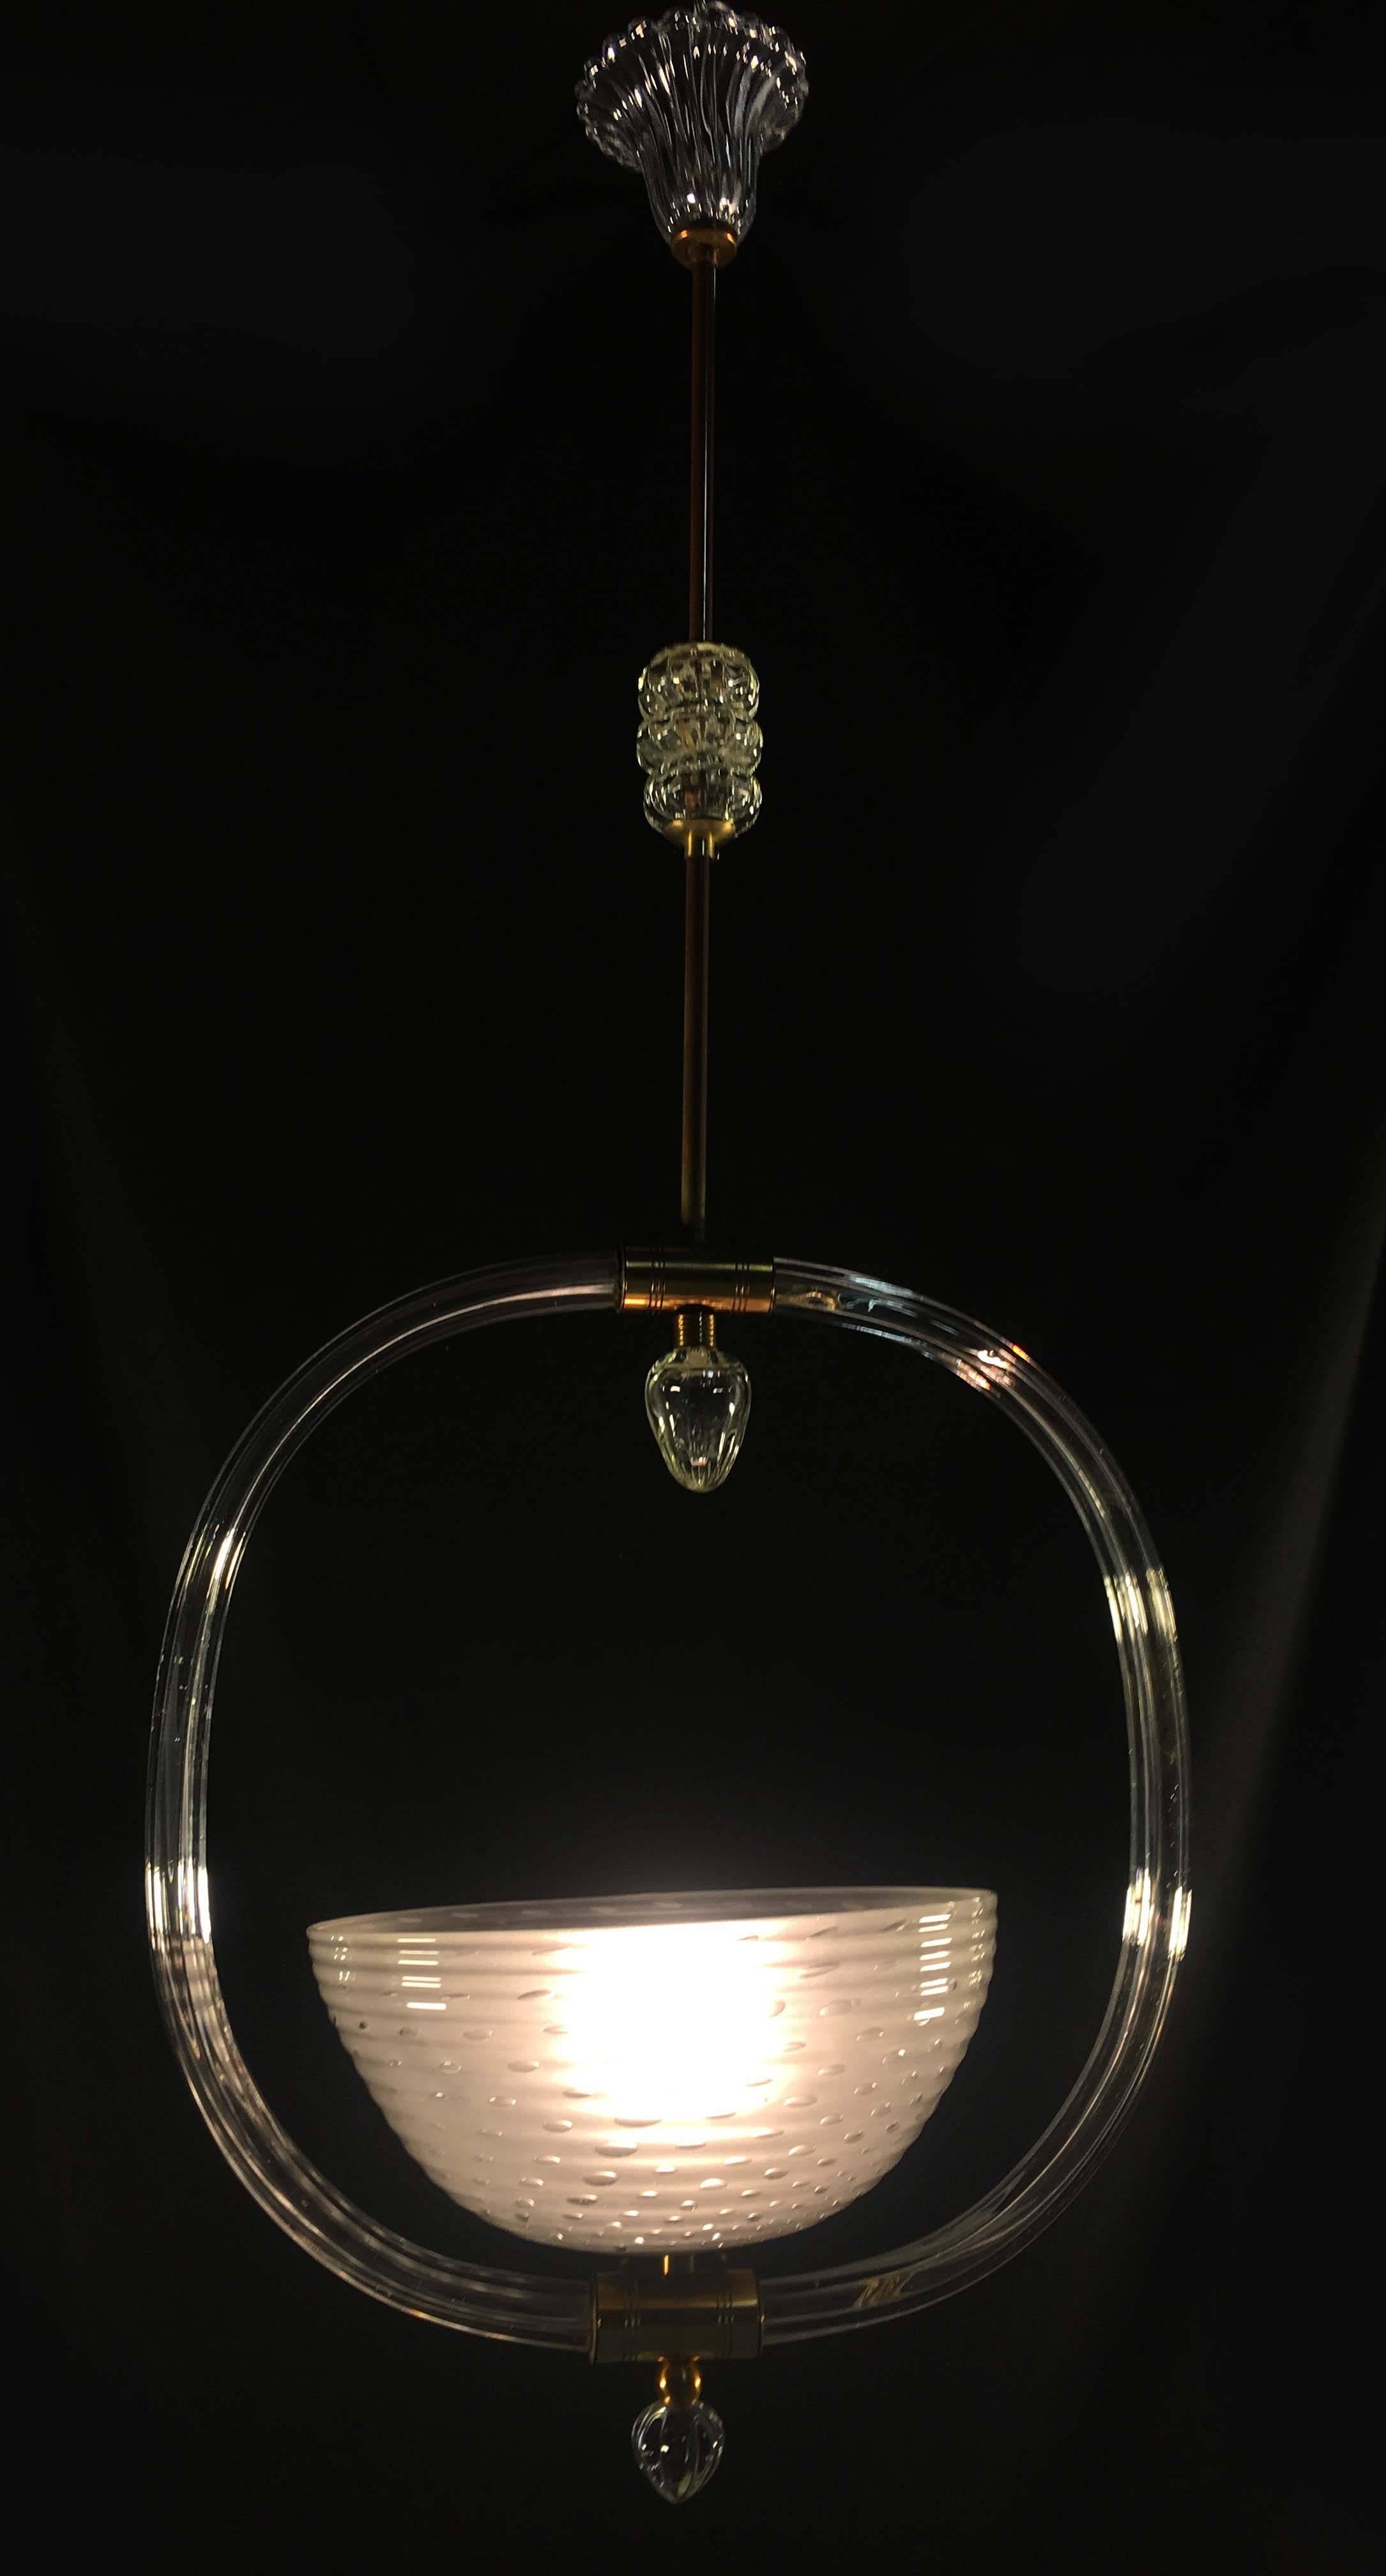 Charming Italian Chandelier by Barovier & Toso, Murano, 1940 For Sale 2